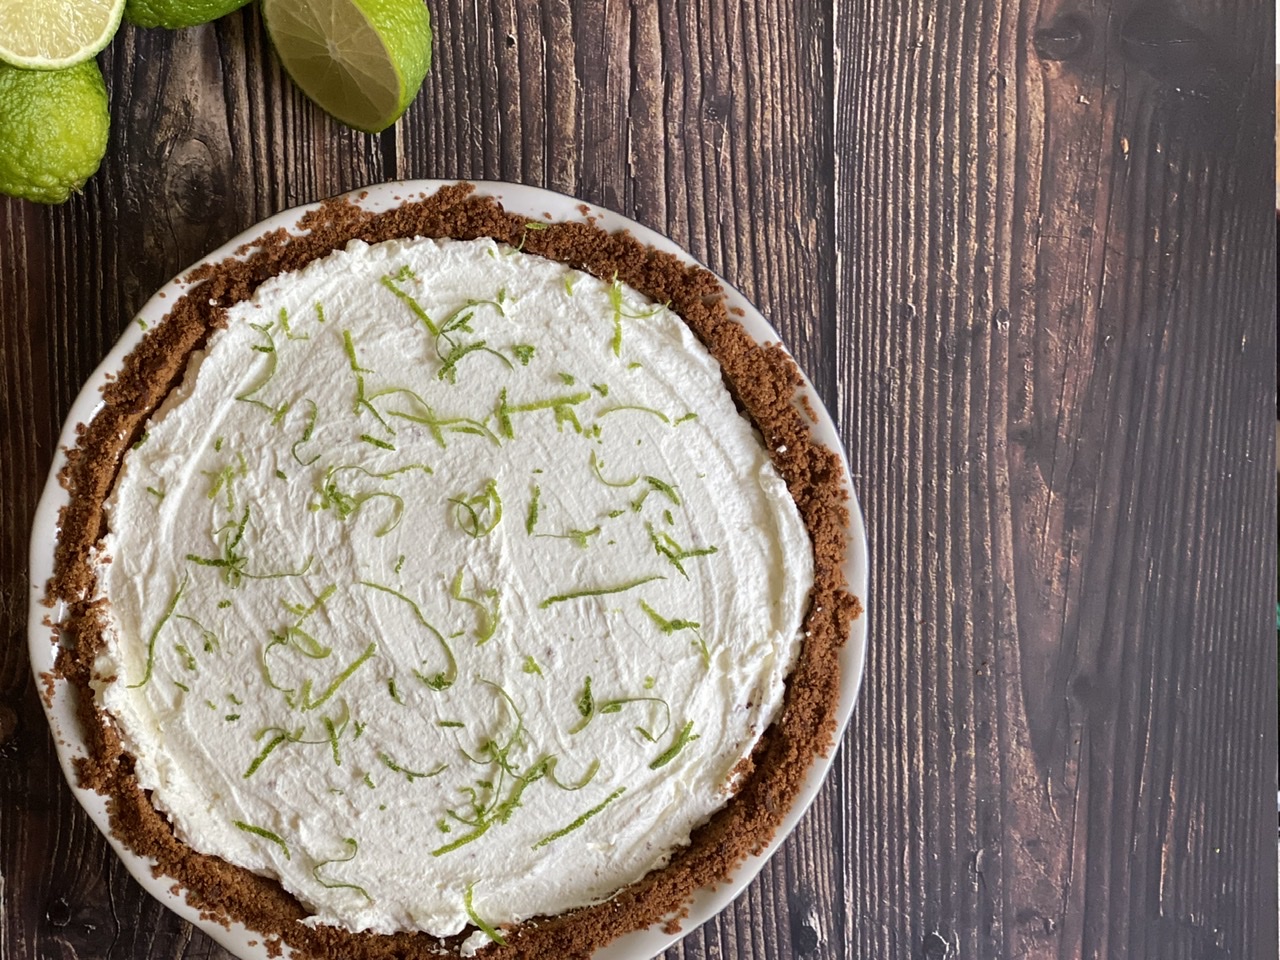 BB8534DE 7DFA 4697 A4F1 0A67F0C003E7 - Boozy Deep Dish Coconut Margarita Key Lime Pie with Tequila Blanco & Coconut Rum